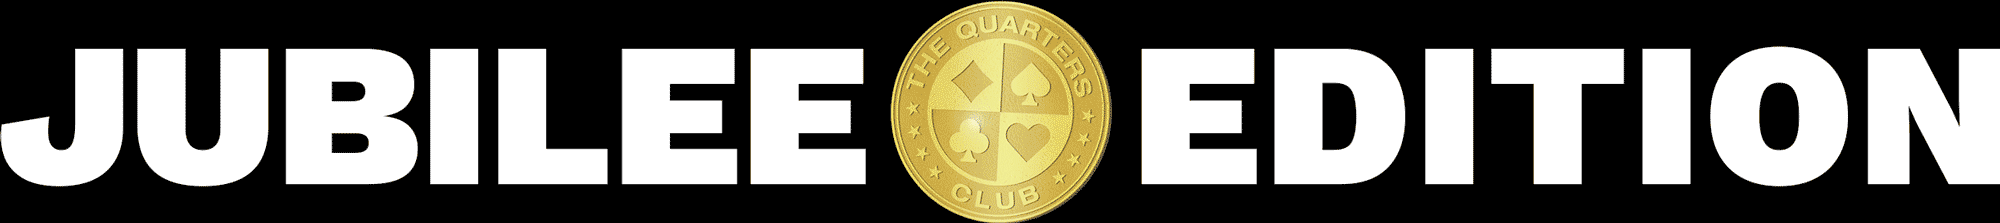 The Quarters Club: Jubilee Edition